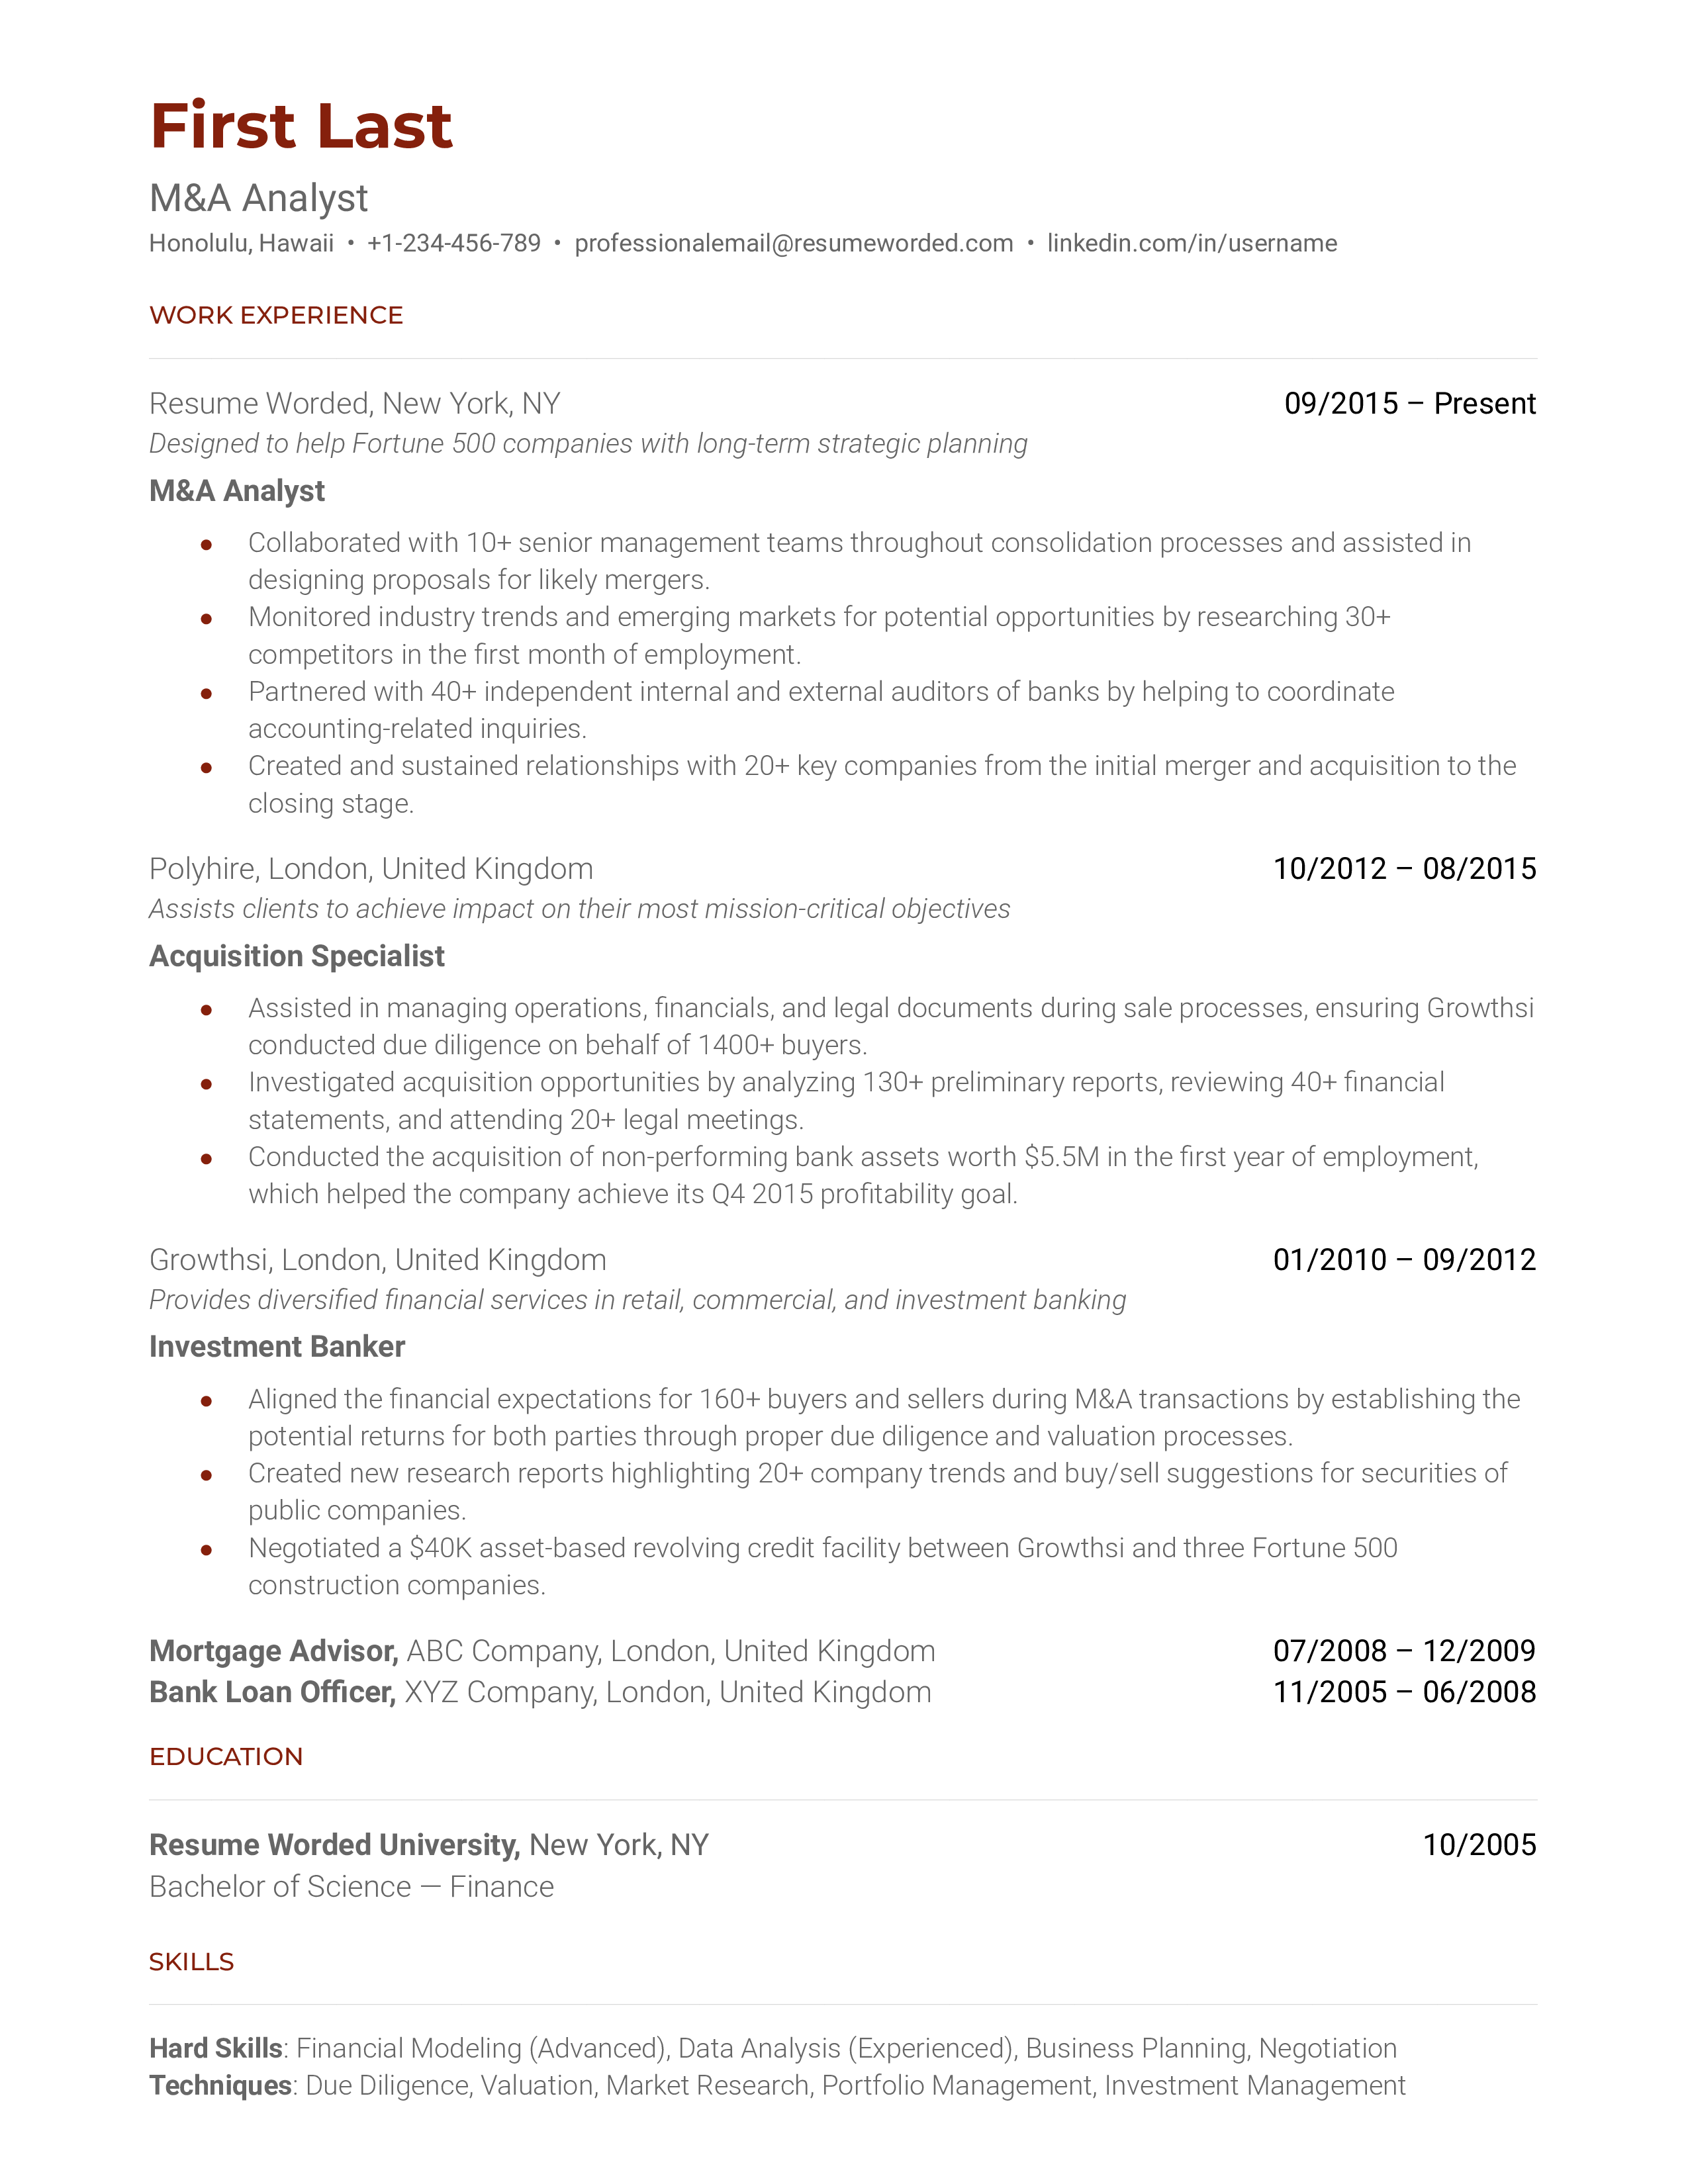 A M&A analyst resume template that uses relevant action verbs.